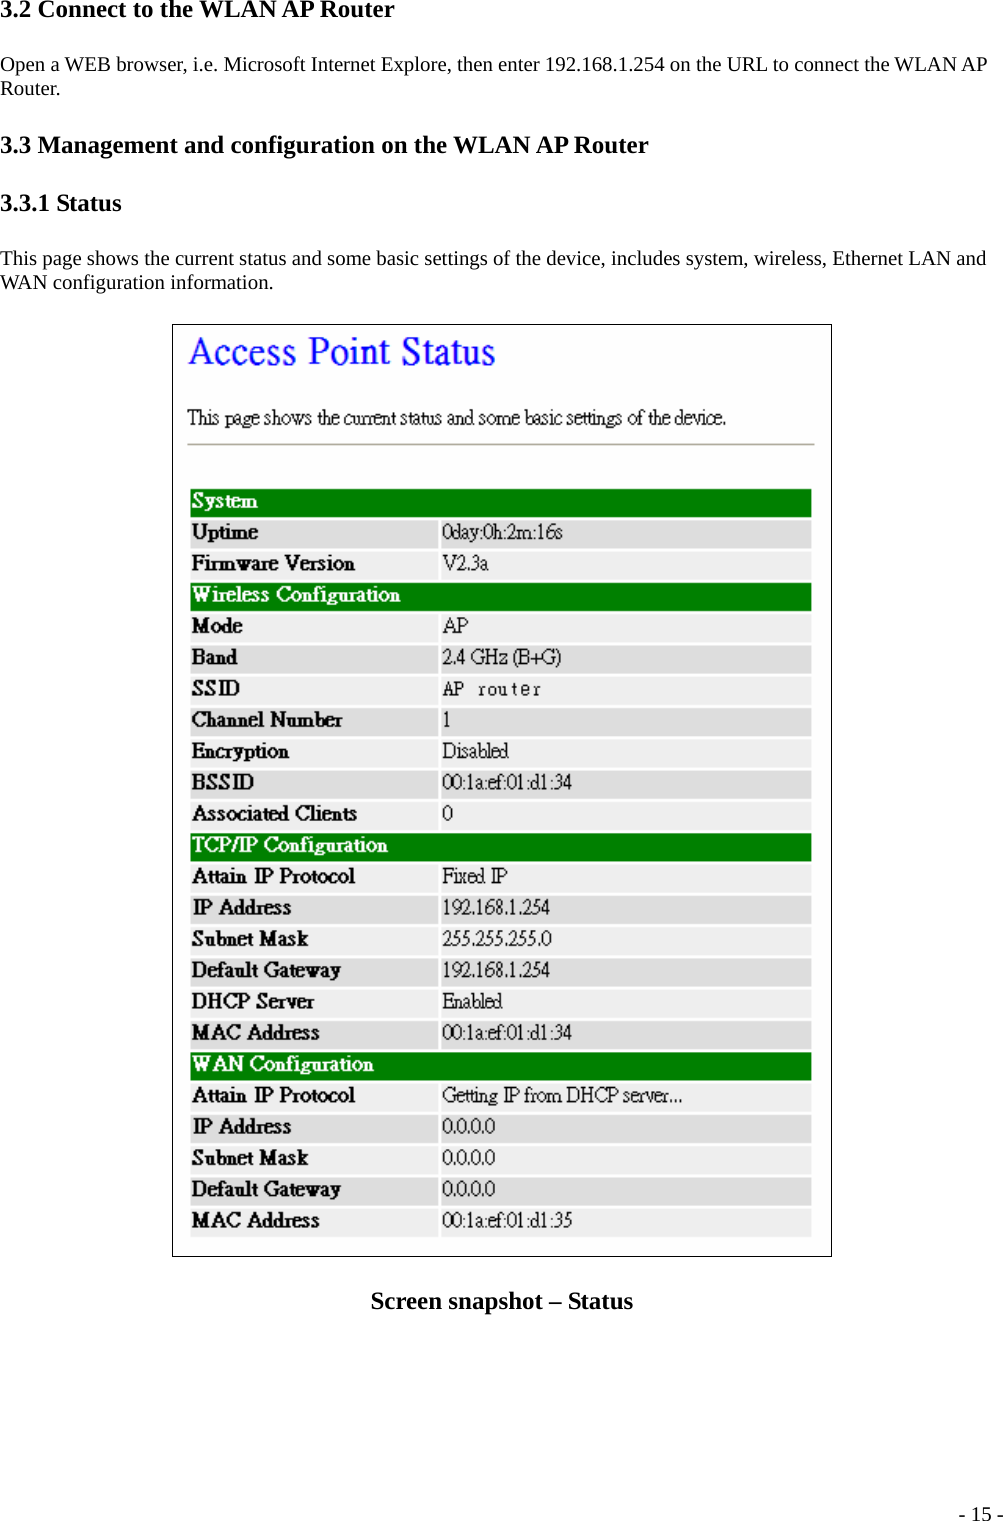 3.2 Connect to the WLAN AP Router Open a WEB browser, i.e. Microsoft Internet Explore, then enter 192.168.1.254 on the URL to connect the WLAN AP Router. 3.3 Management and configuration on the WLAN AP Router 3.3.1 Status This page shows the current status and some basic settings of the device, includes system, wireless, Ethernet LAN and WAN configuration information.  Screen snapshot – Status  - 15 -